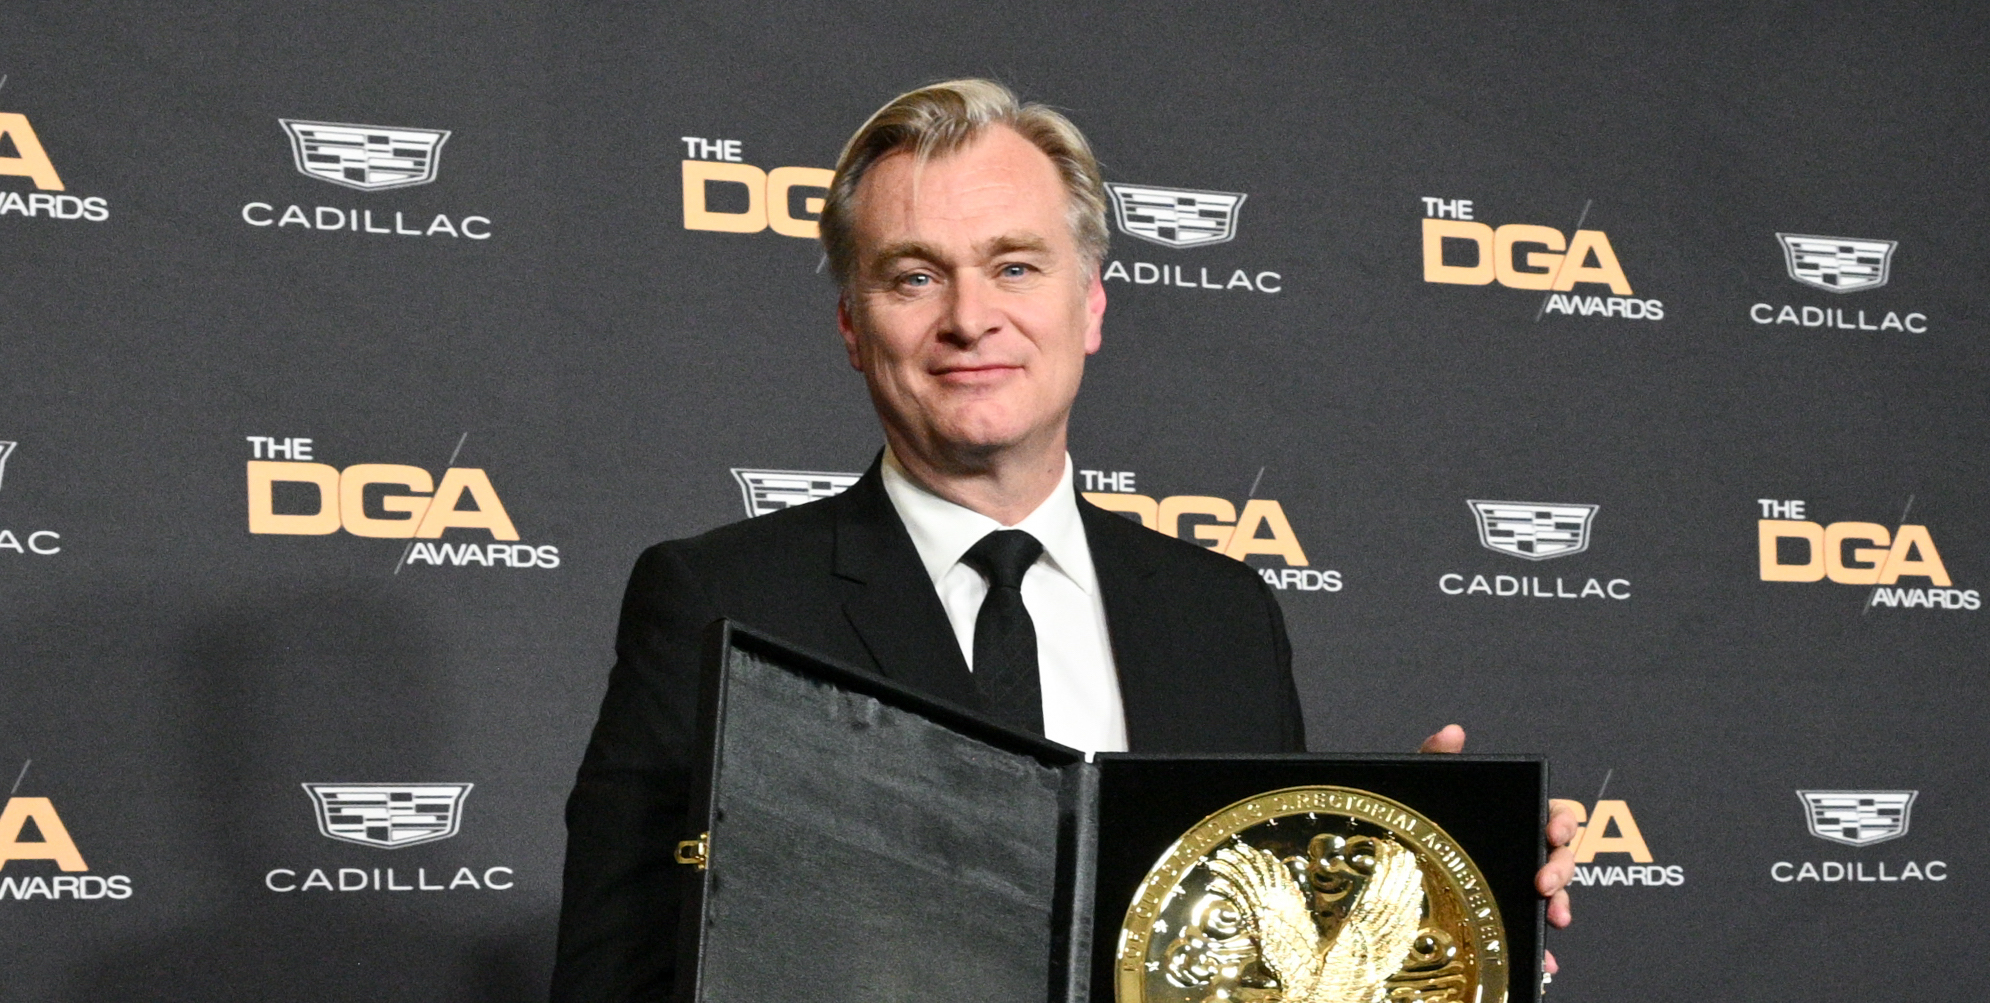 Christopher Nolan, dressed in a formal black suit, holding an award at the 76th Annual DGA Awards.